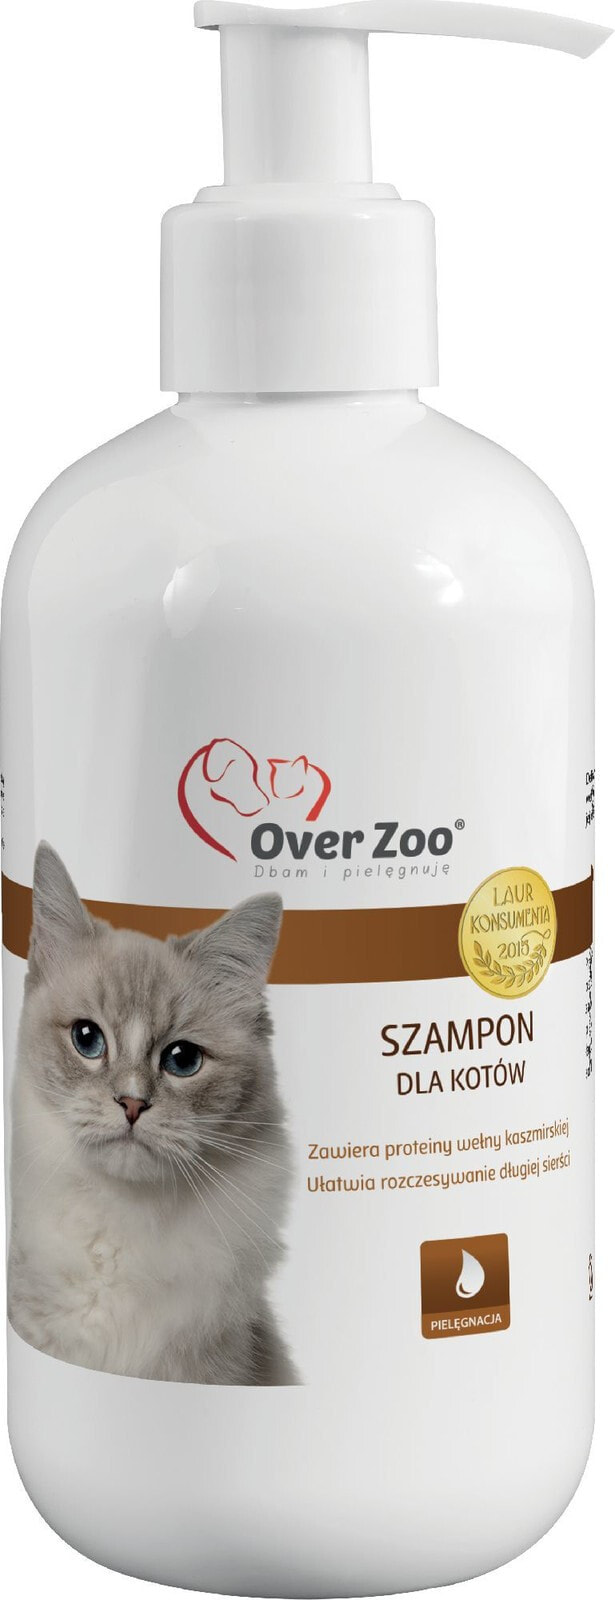 OVER ZOO SHAMPOO FOR CATS 250ml